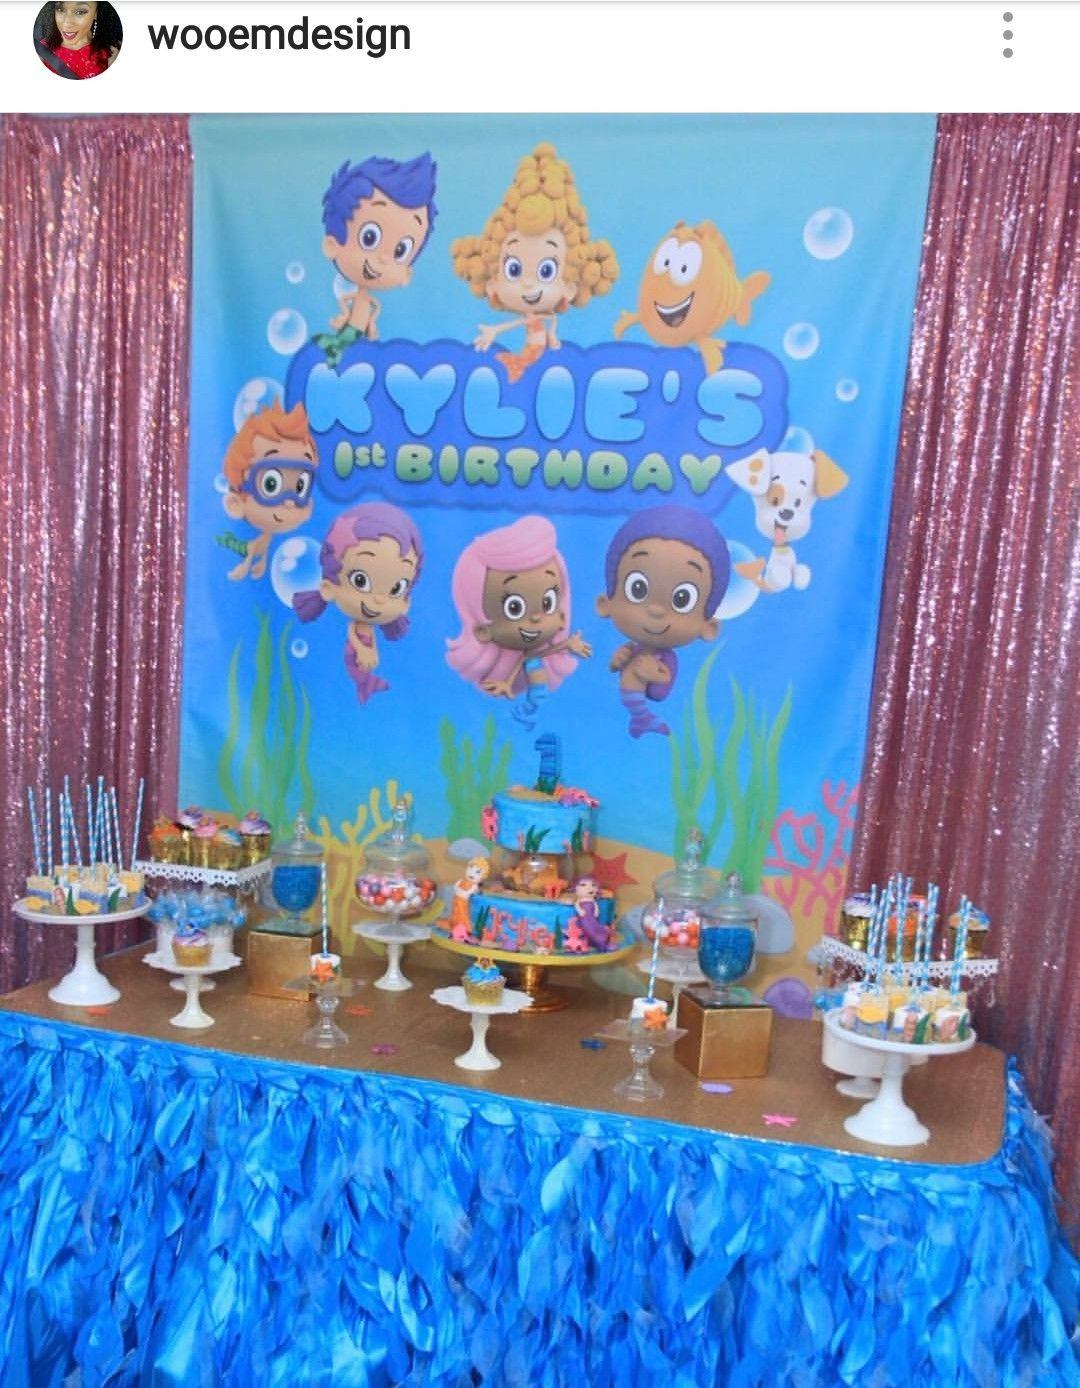 Bubble Guppies Birthday Party Decorations
 Bubble Guppies Birthday Party Dessert Table and Decor